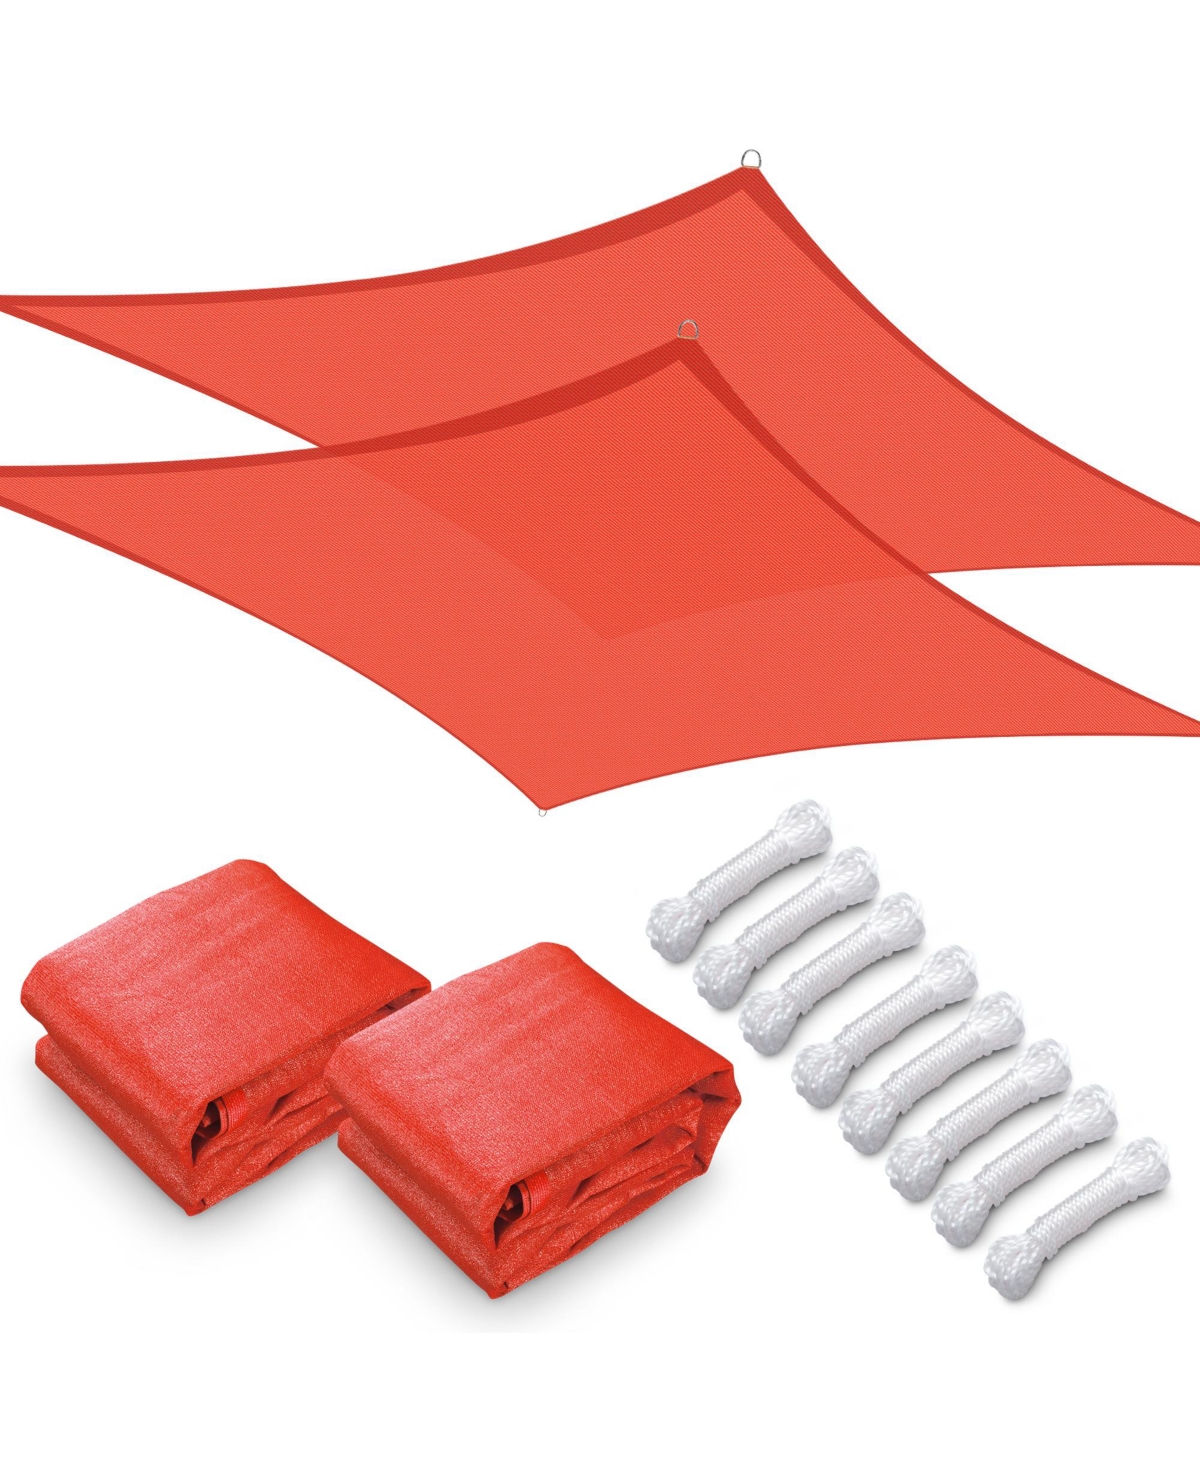 2 Pack 23x22 Ft 97% Uv Block Rectangle Sun Shade Sail Heavy Duty Canopy Outdoor - Watermelon red